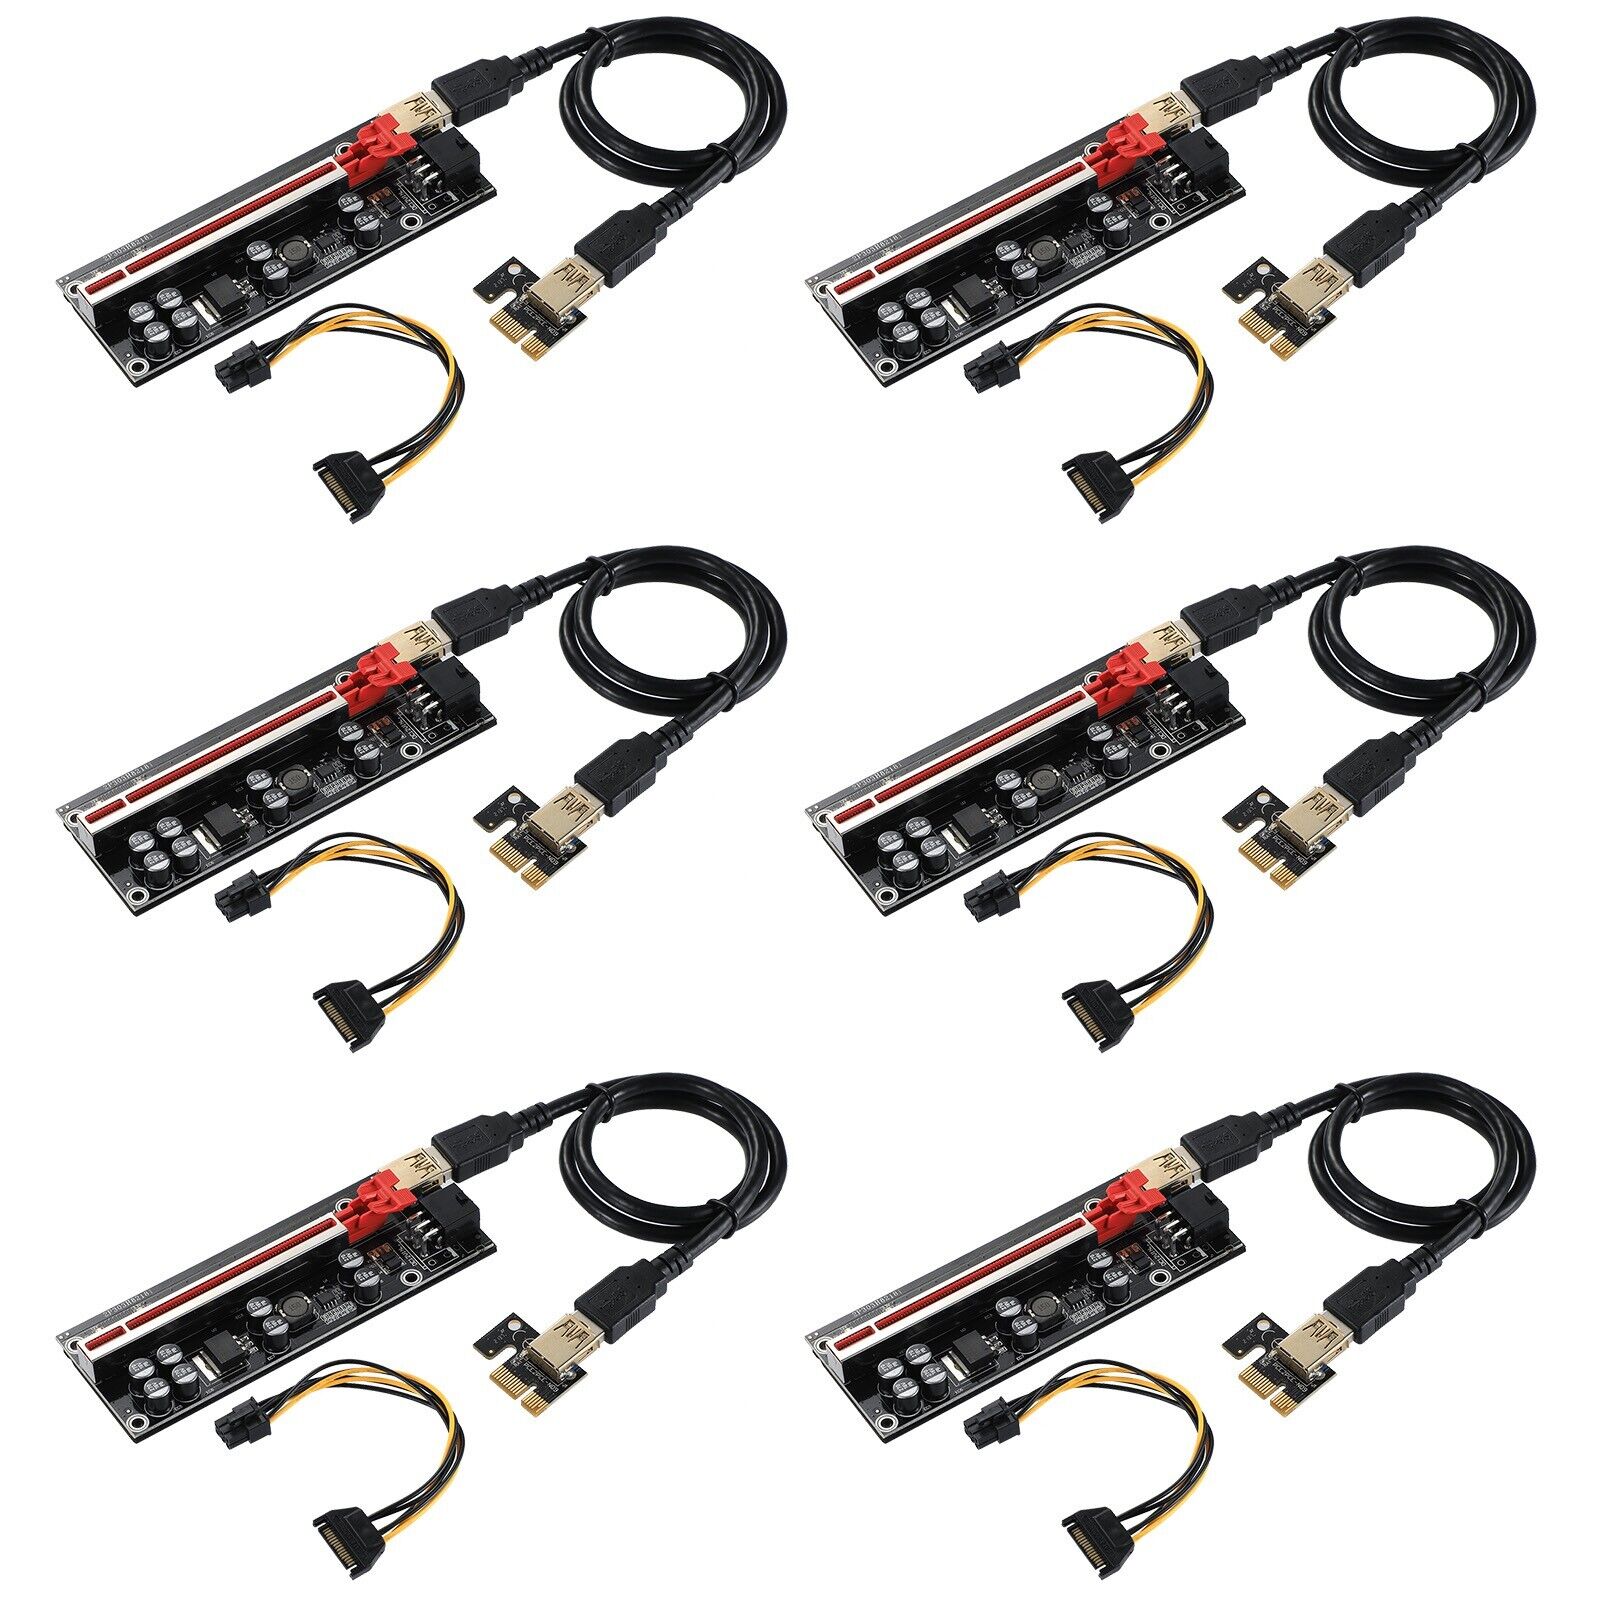 MZHOU 6PACK PCI-E 1X to 16X V009S-PLUS Riser Card with PCI-E 1X Plug-in Adapter